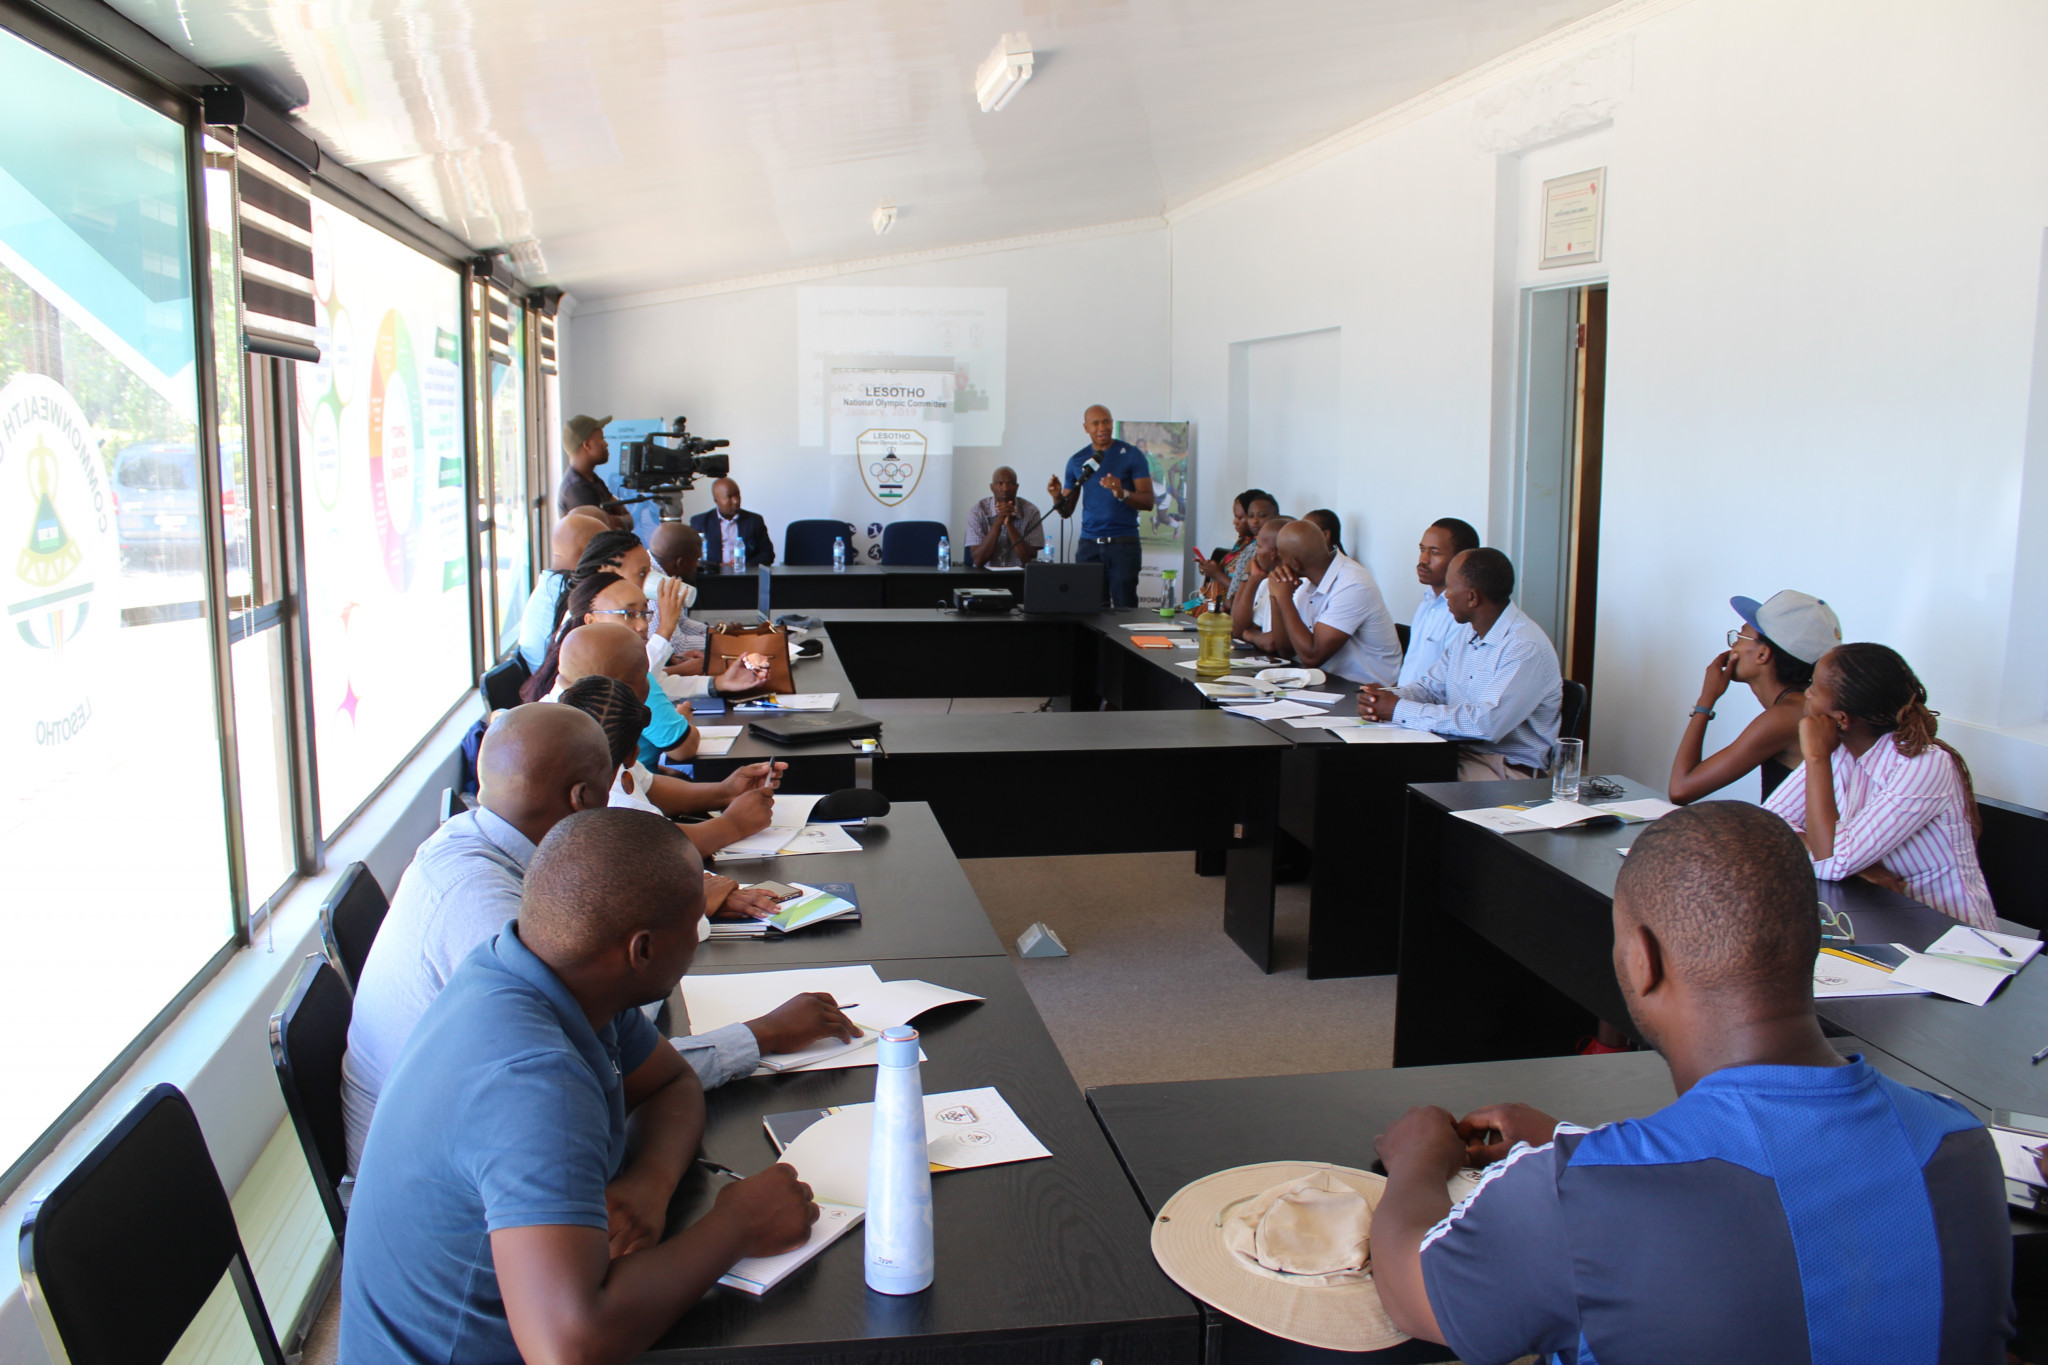 Twenty participants will take part in the course which teaches sport administrators how to bring about positive change in sport organisations ©Lesotho National Olympic Committee